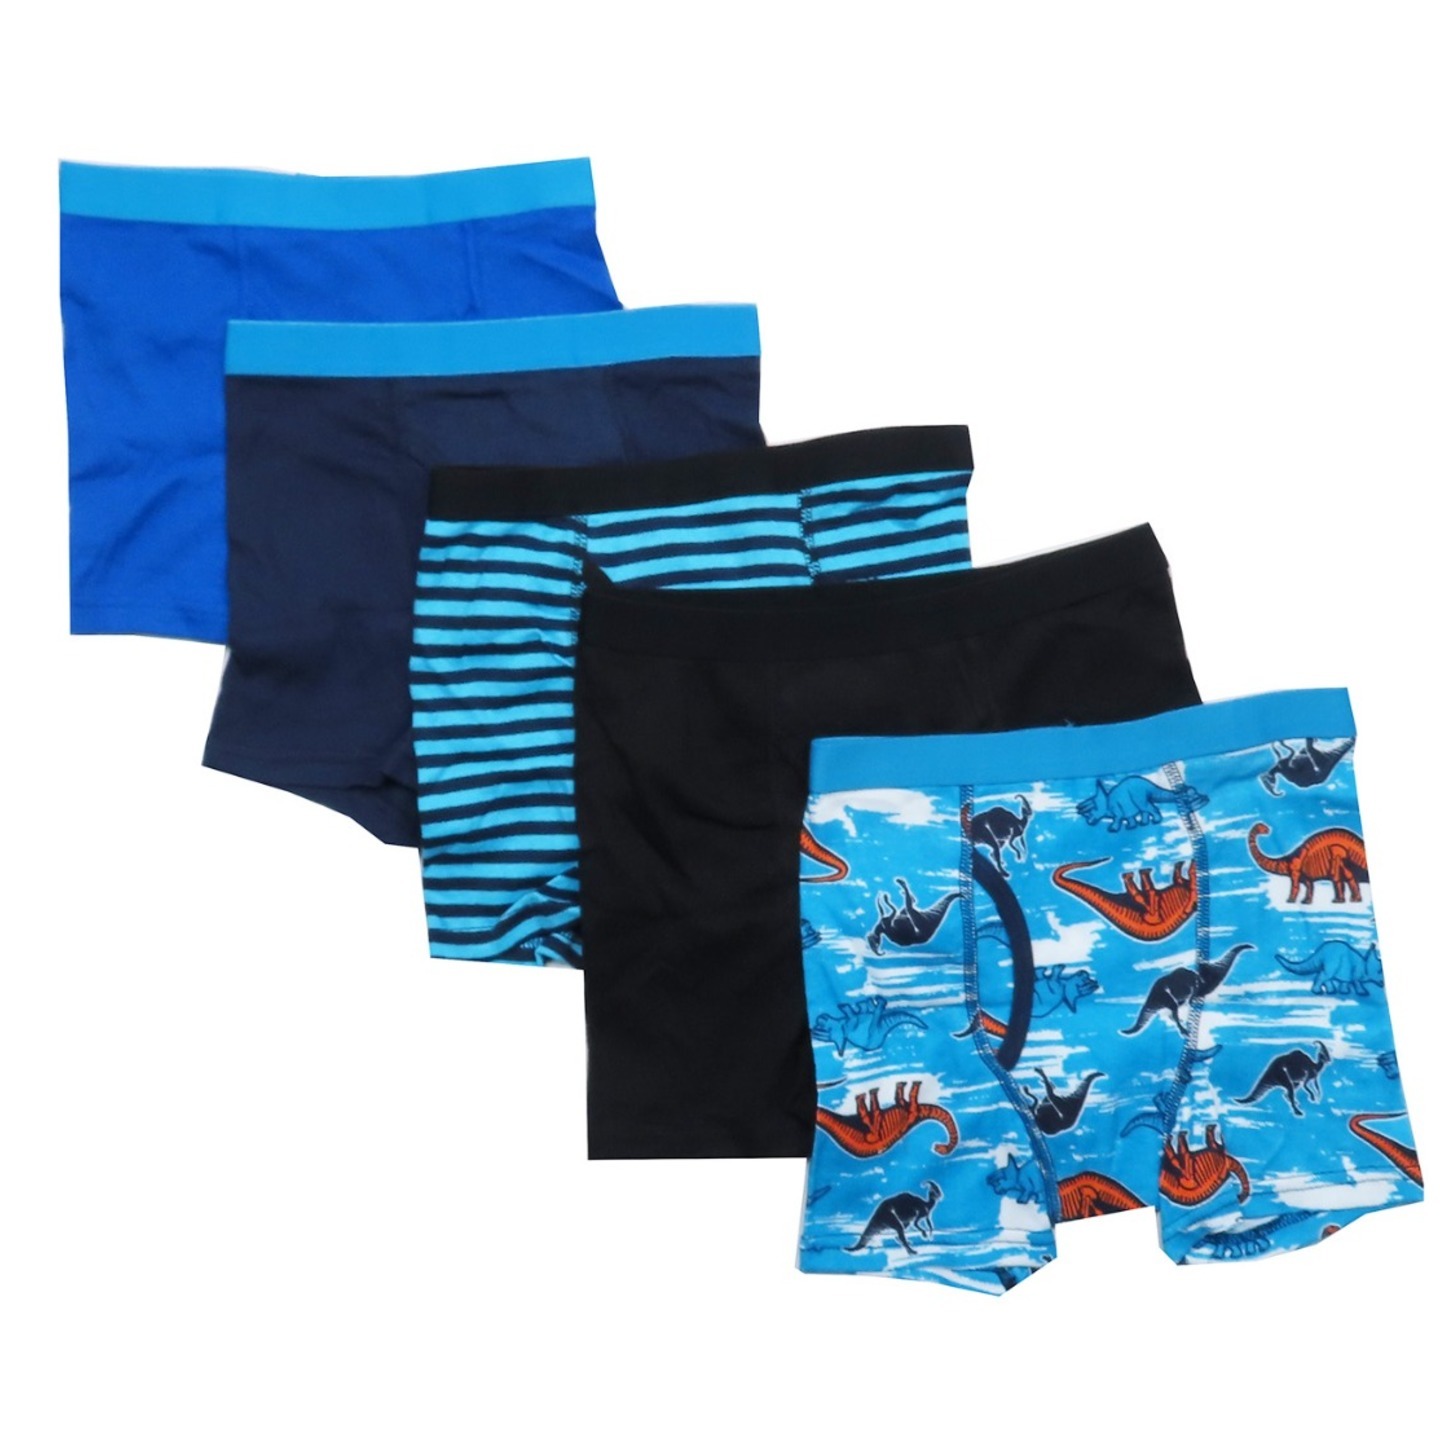 BOYS 3 PACK BOXERS